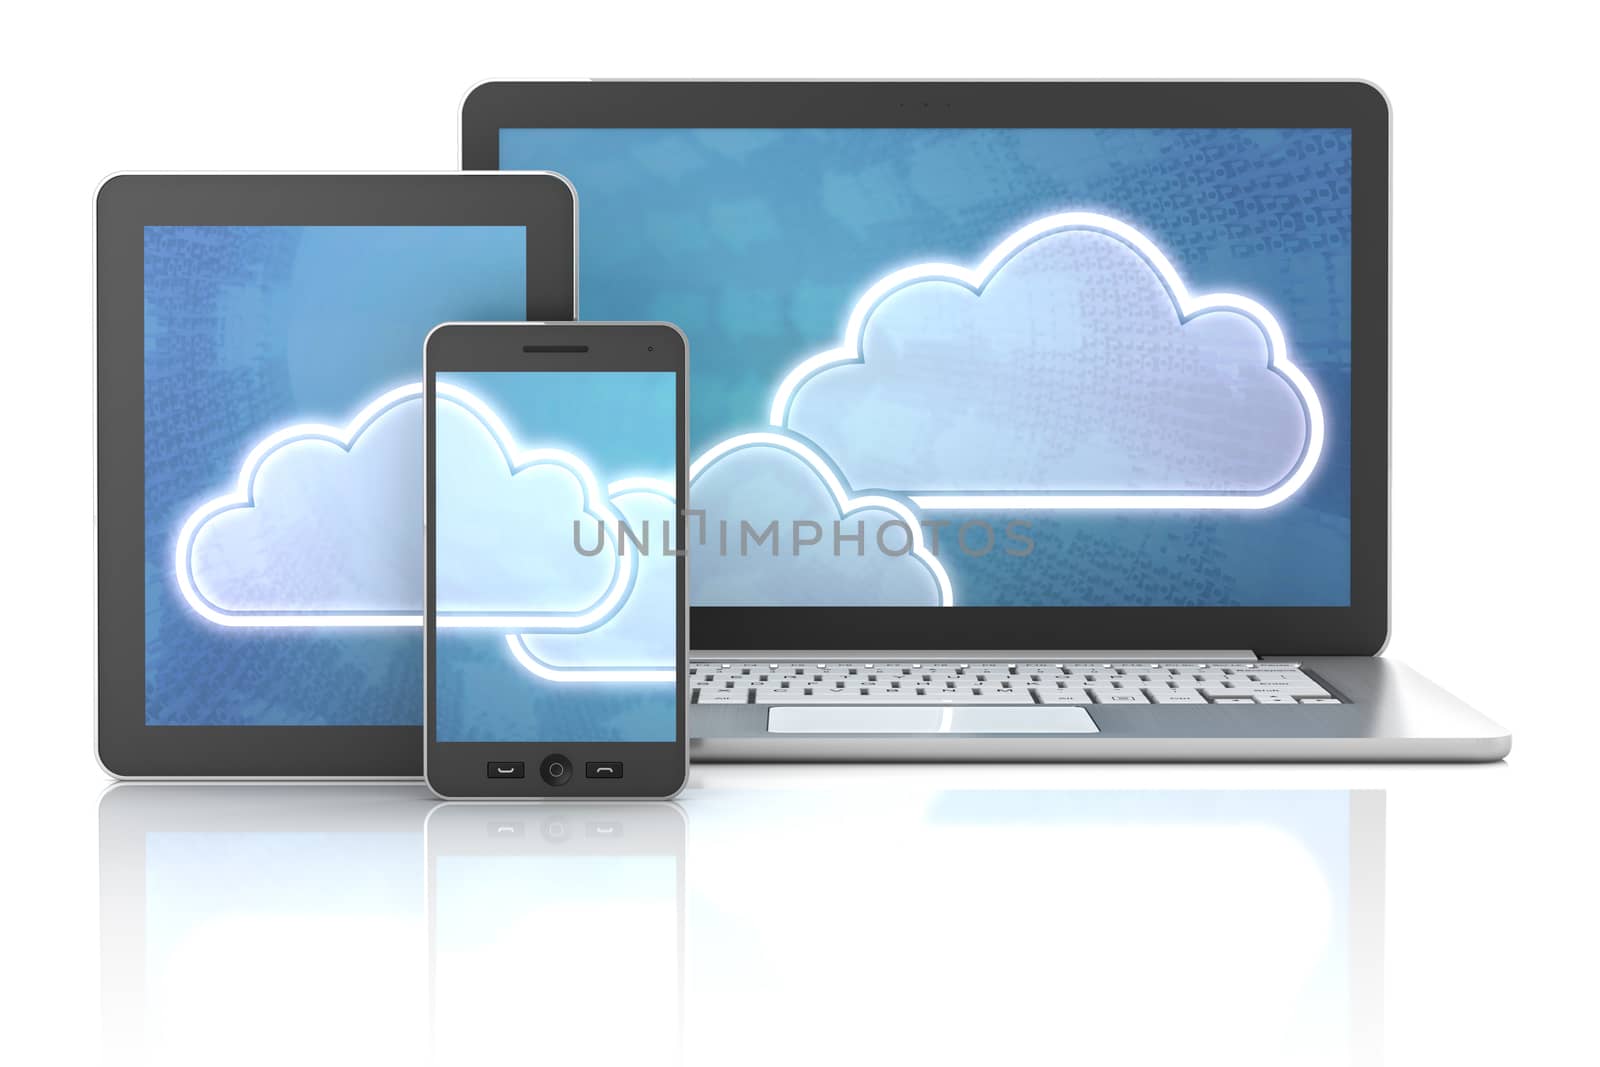 Cloud symbols on gadgets, including tablet, smartphone and computer, 3d render, white background